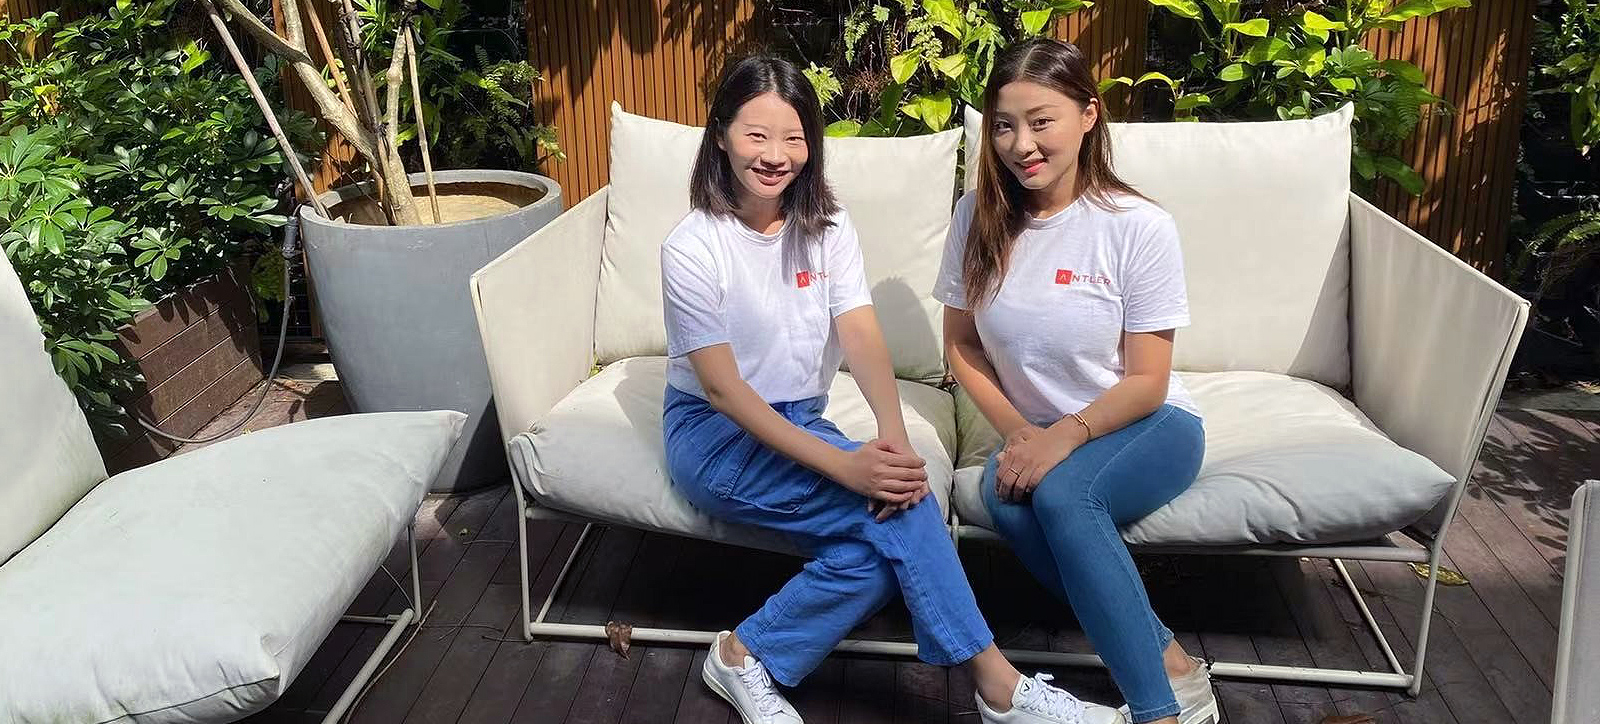 Sharon Li (left) with CHOYS co-founder Vanessa Chen